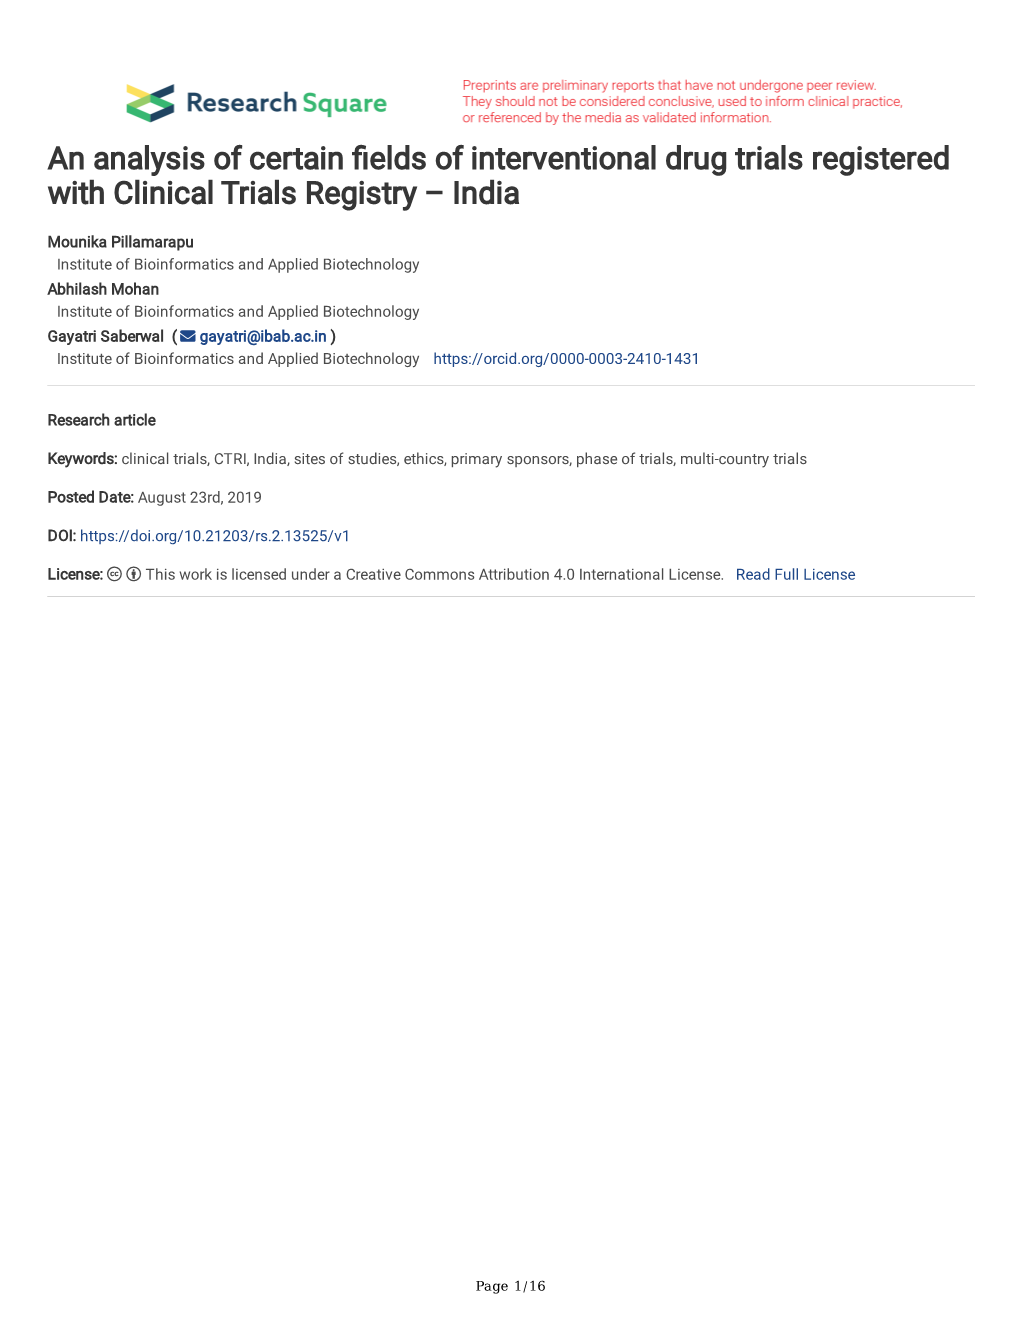 An Analysis of Certain Elds of Interventional Drug Trials Registered with Clinical Trials Registry – India